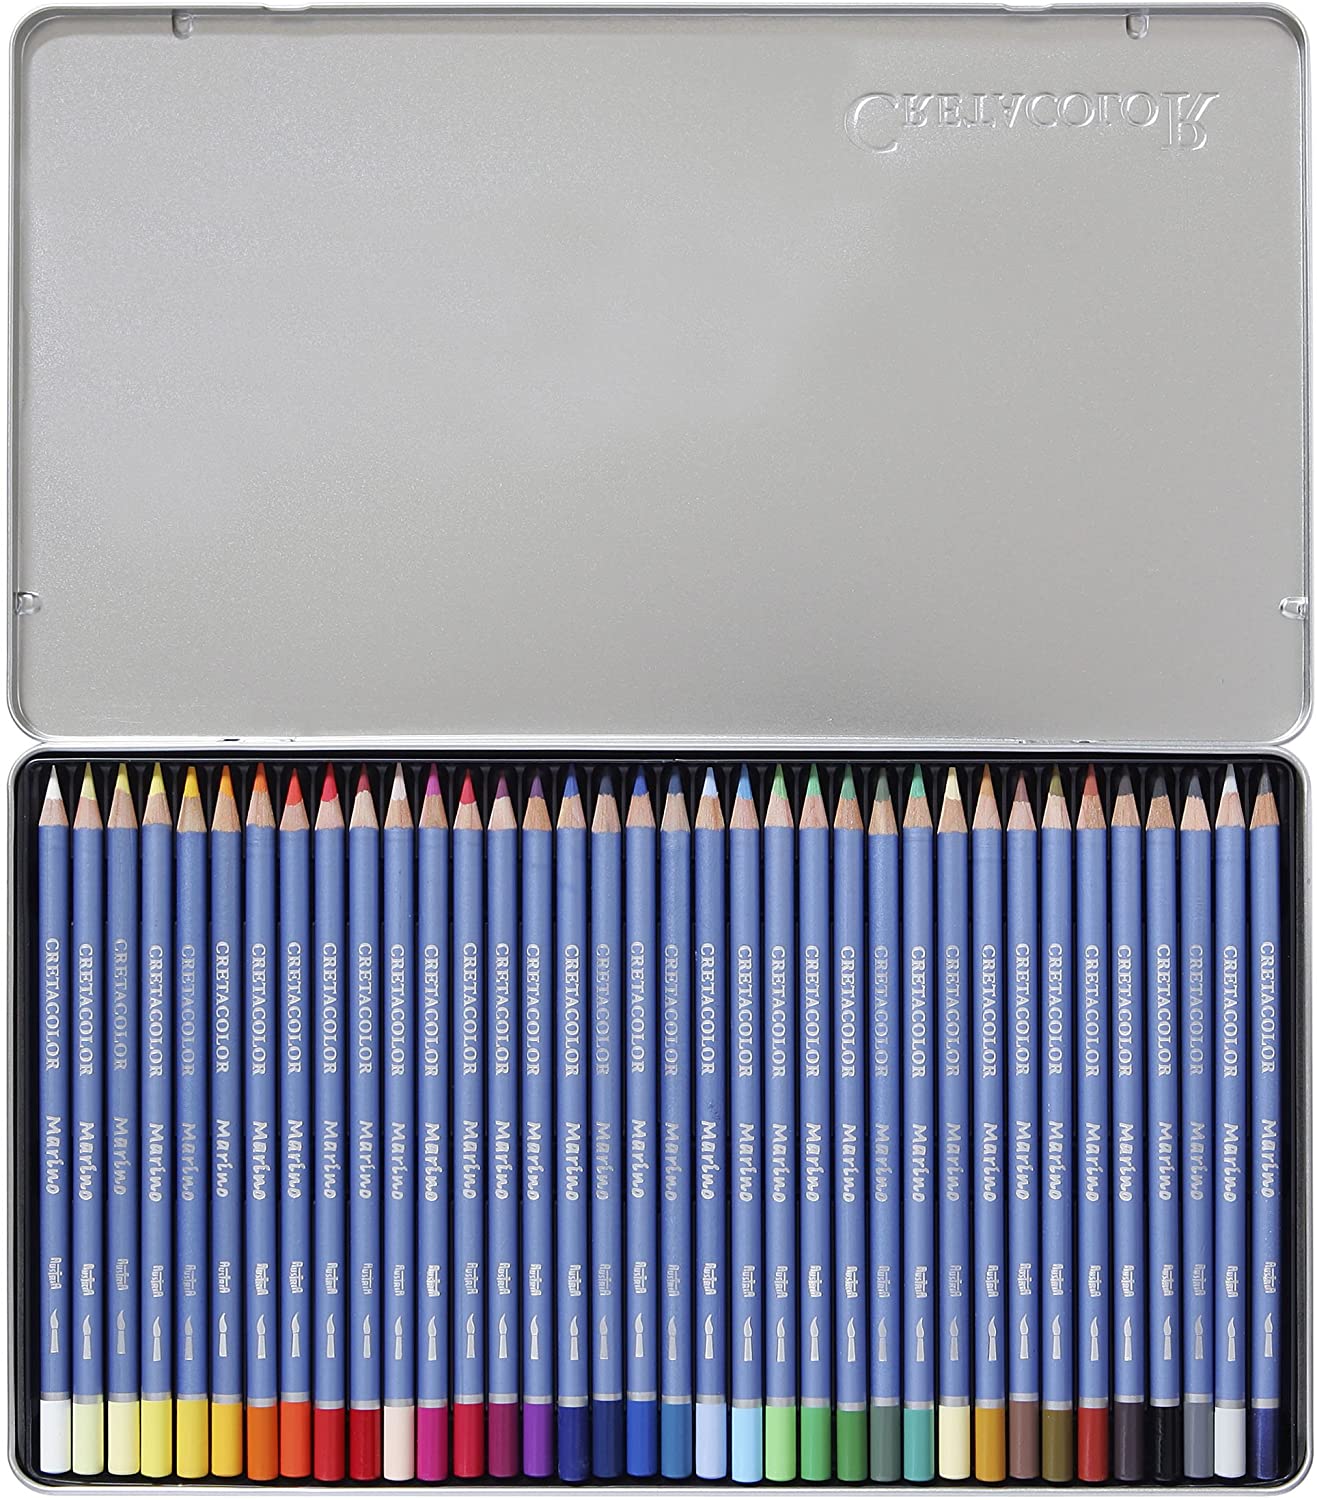 Cretacolor 240 ??? Marino 36 Watercolour Pencils Set of 36, Made from Wood